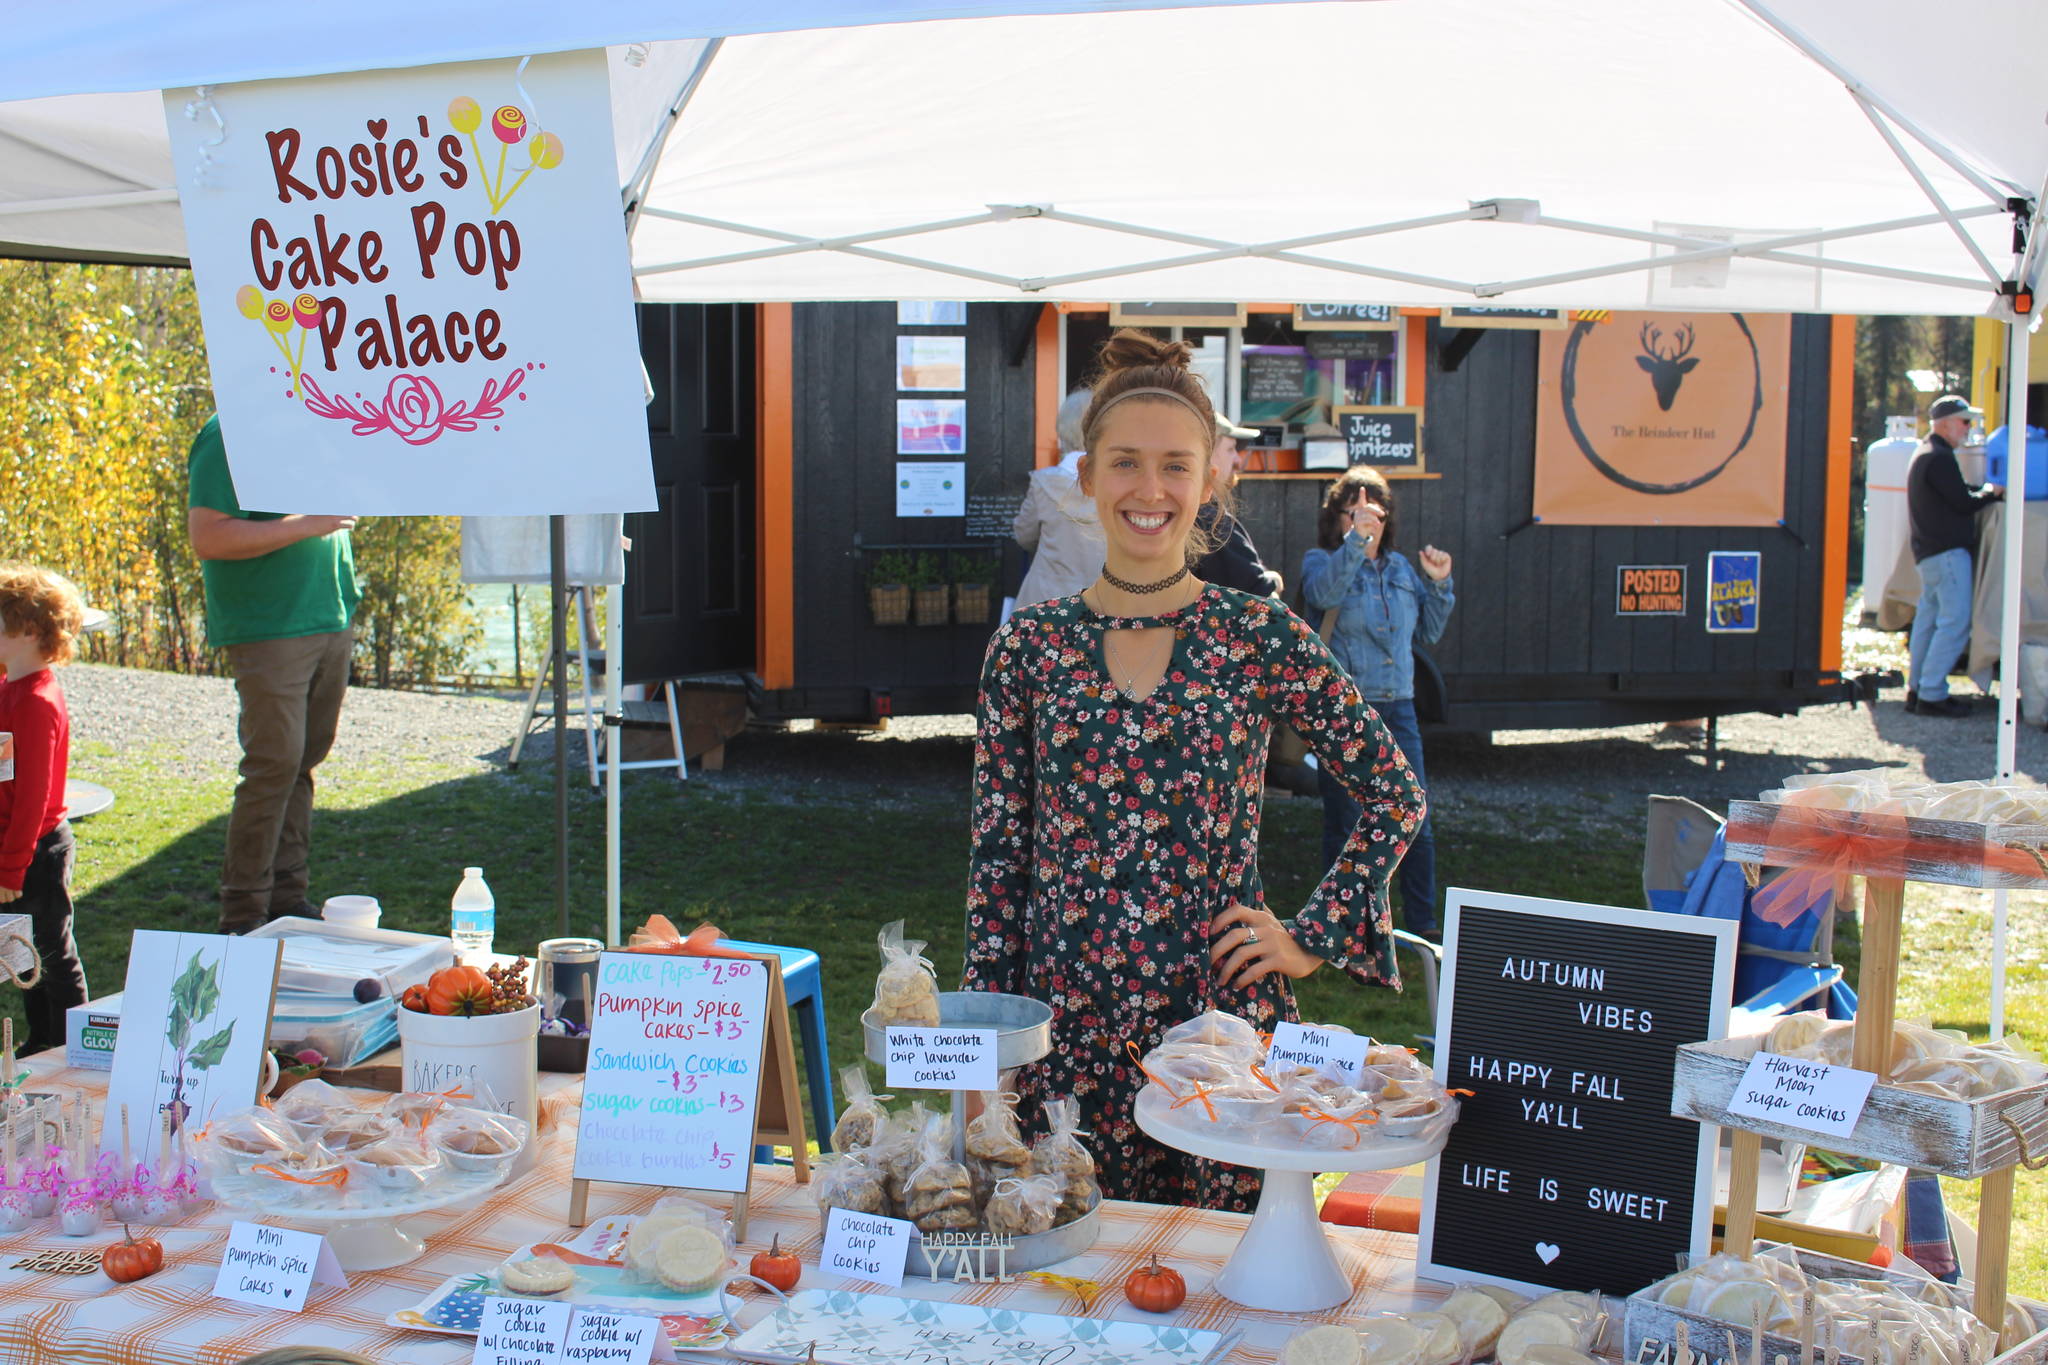 Shelby Dykstra of Rosie’s Cake Pop Palace shows off her baked goods at the Harvest Moon Local Food Festival at Soldotna Creek Park on Sept. 14, 2019. (Photo by Brian Mazurek/Peninsula Clarion)